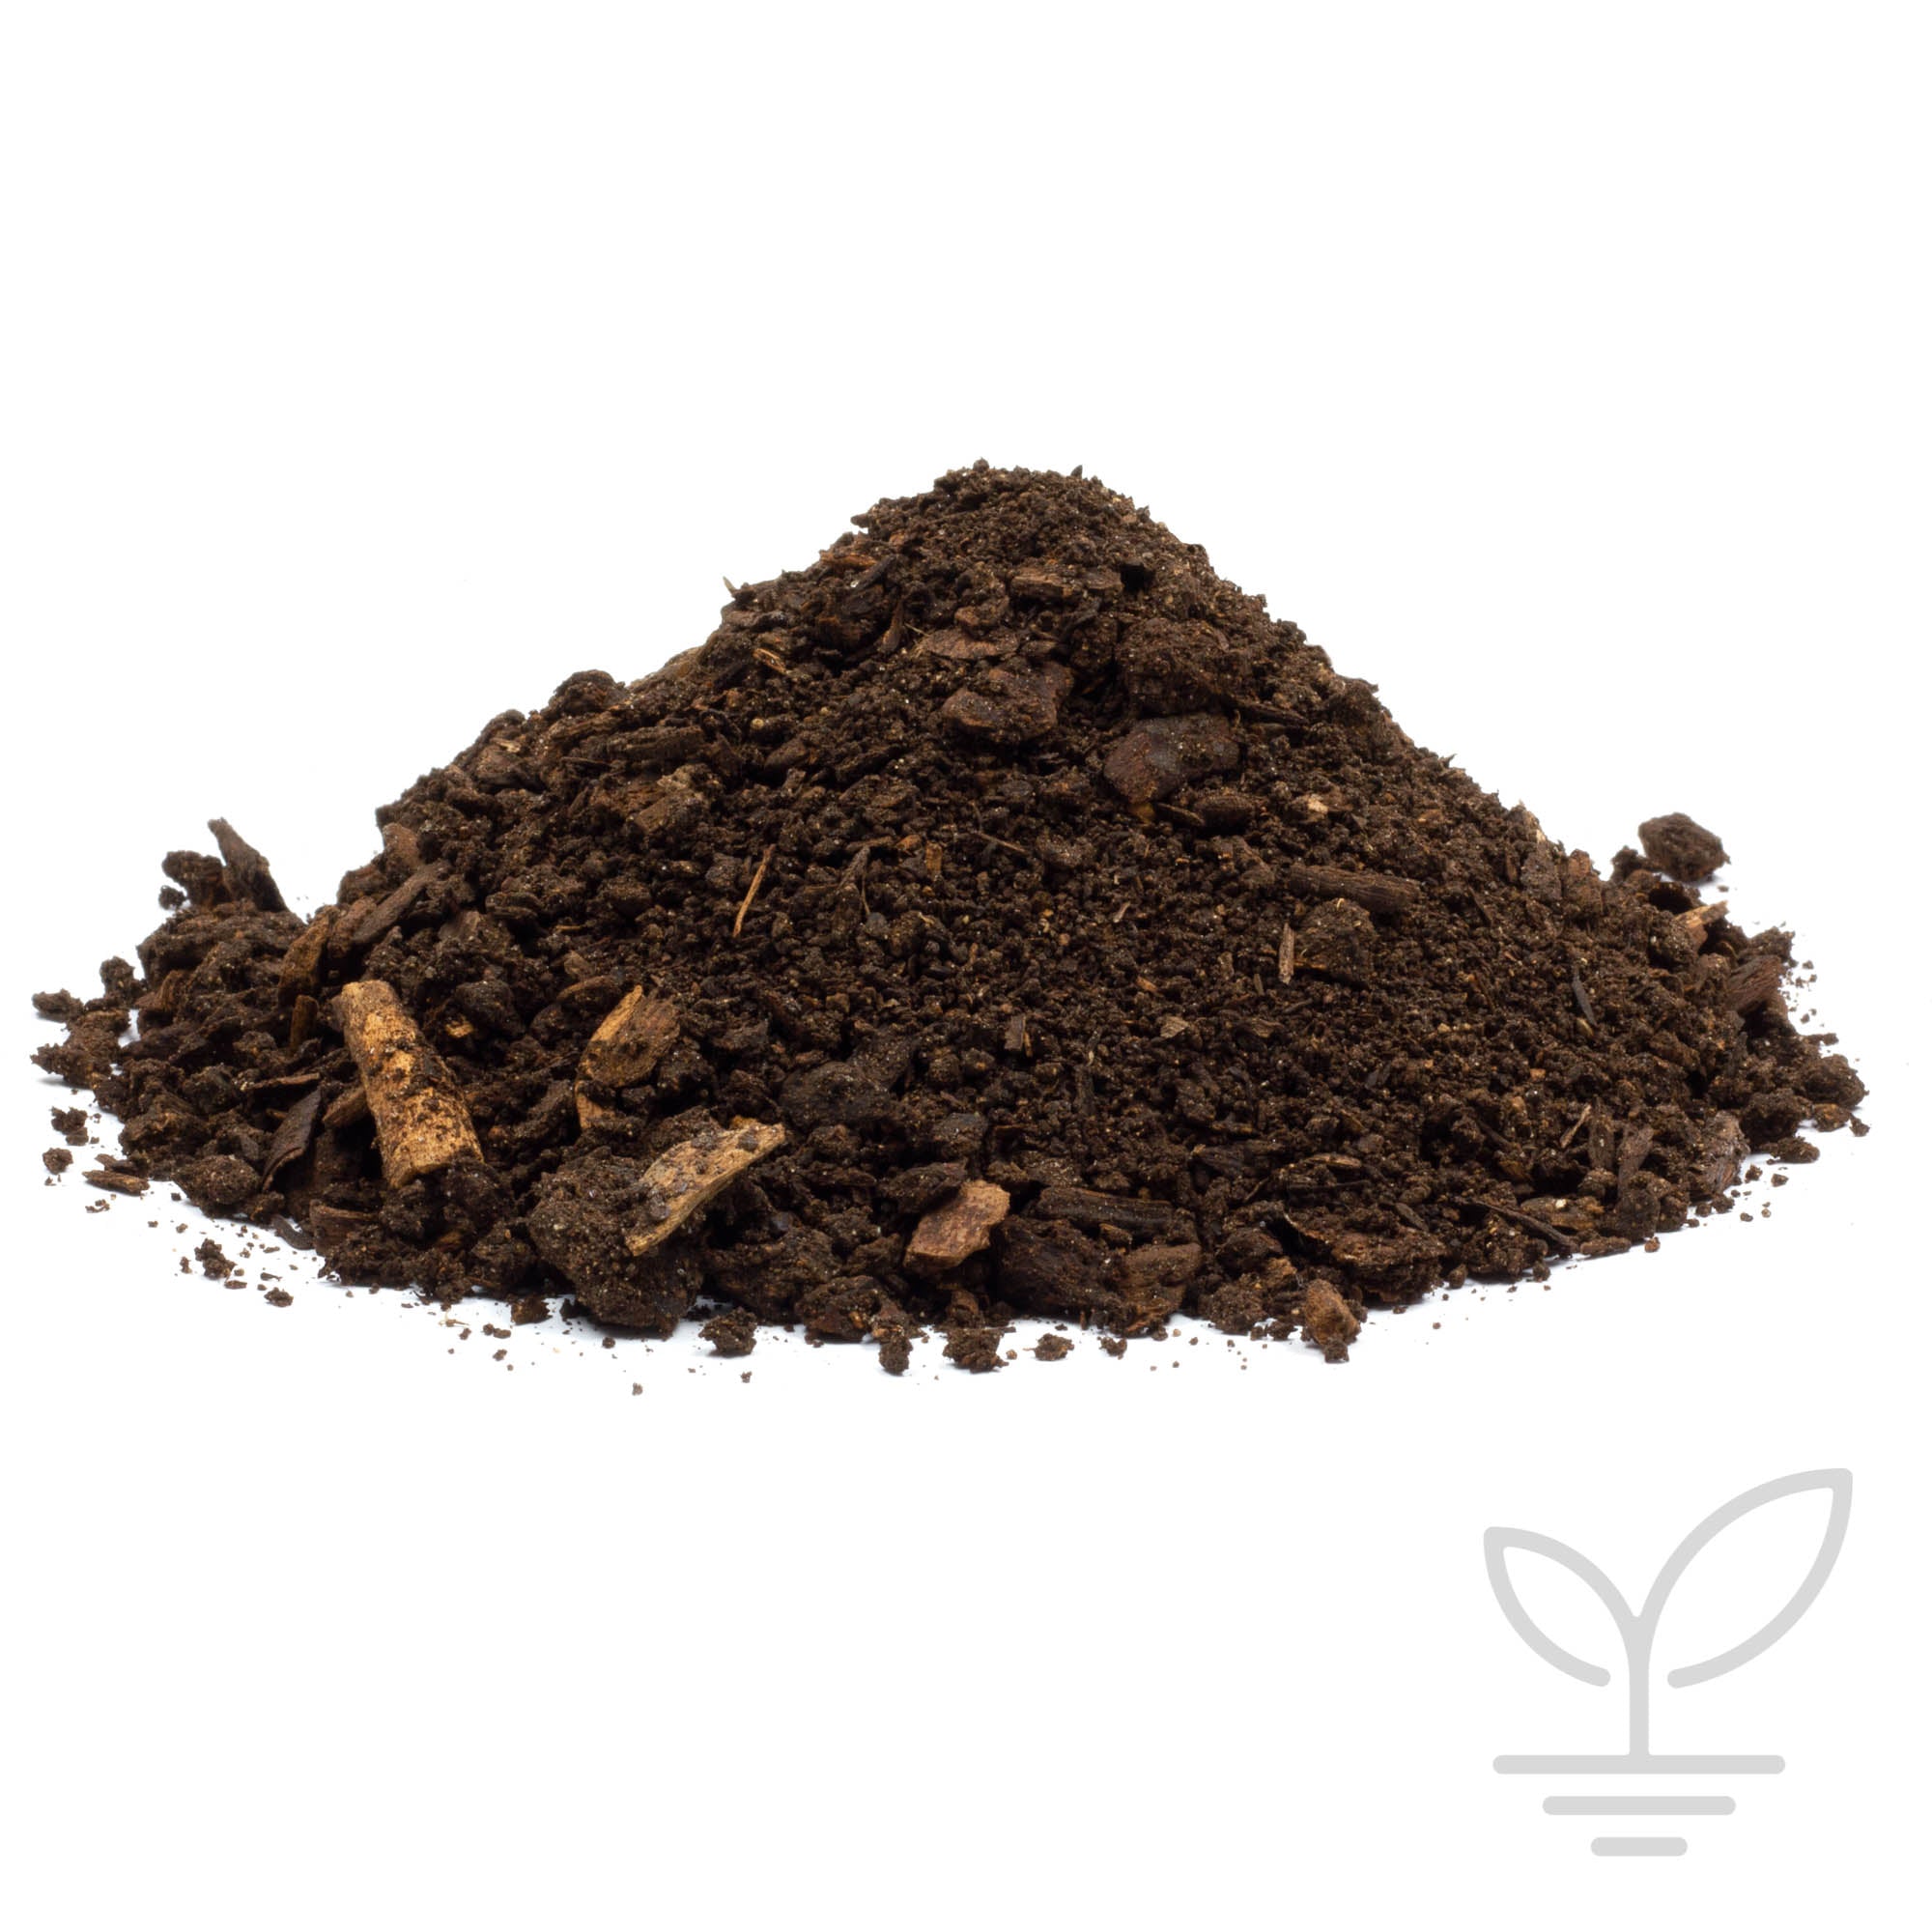 Chaos Springs Organic Certified Compost